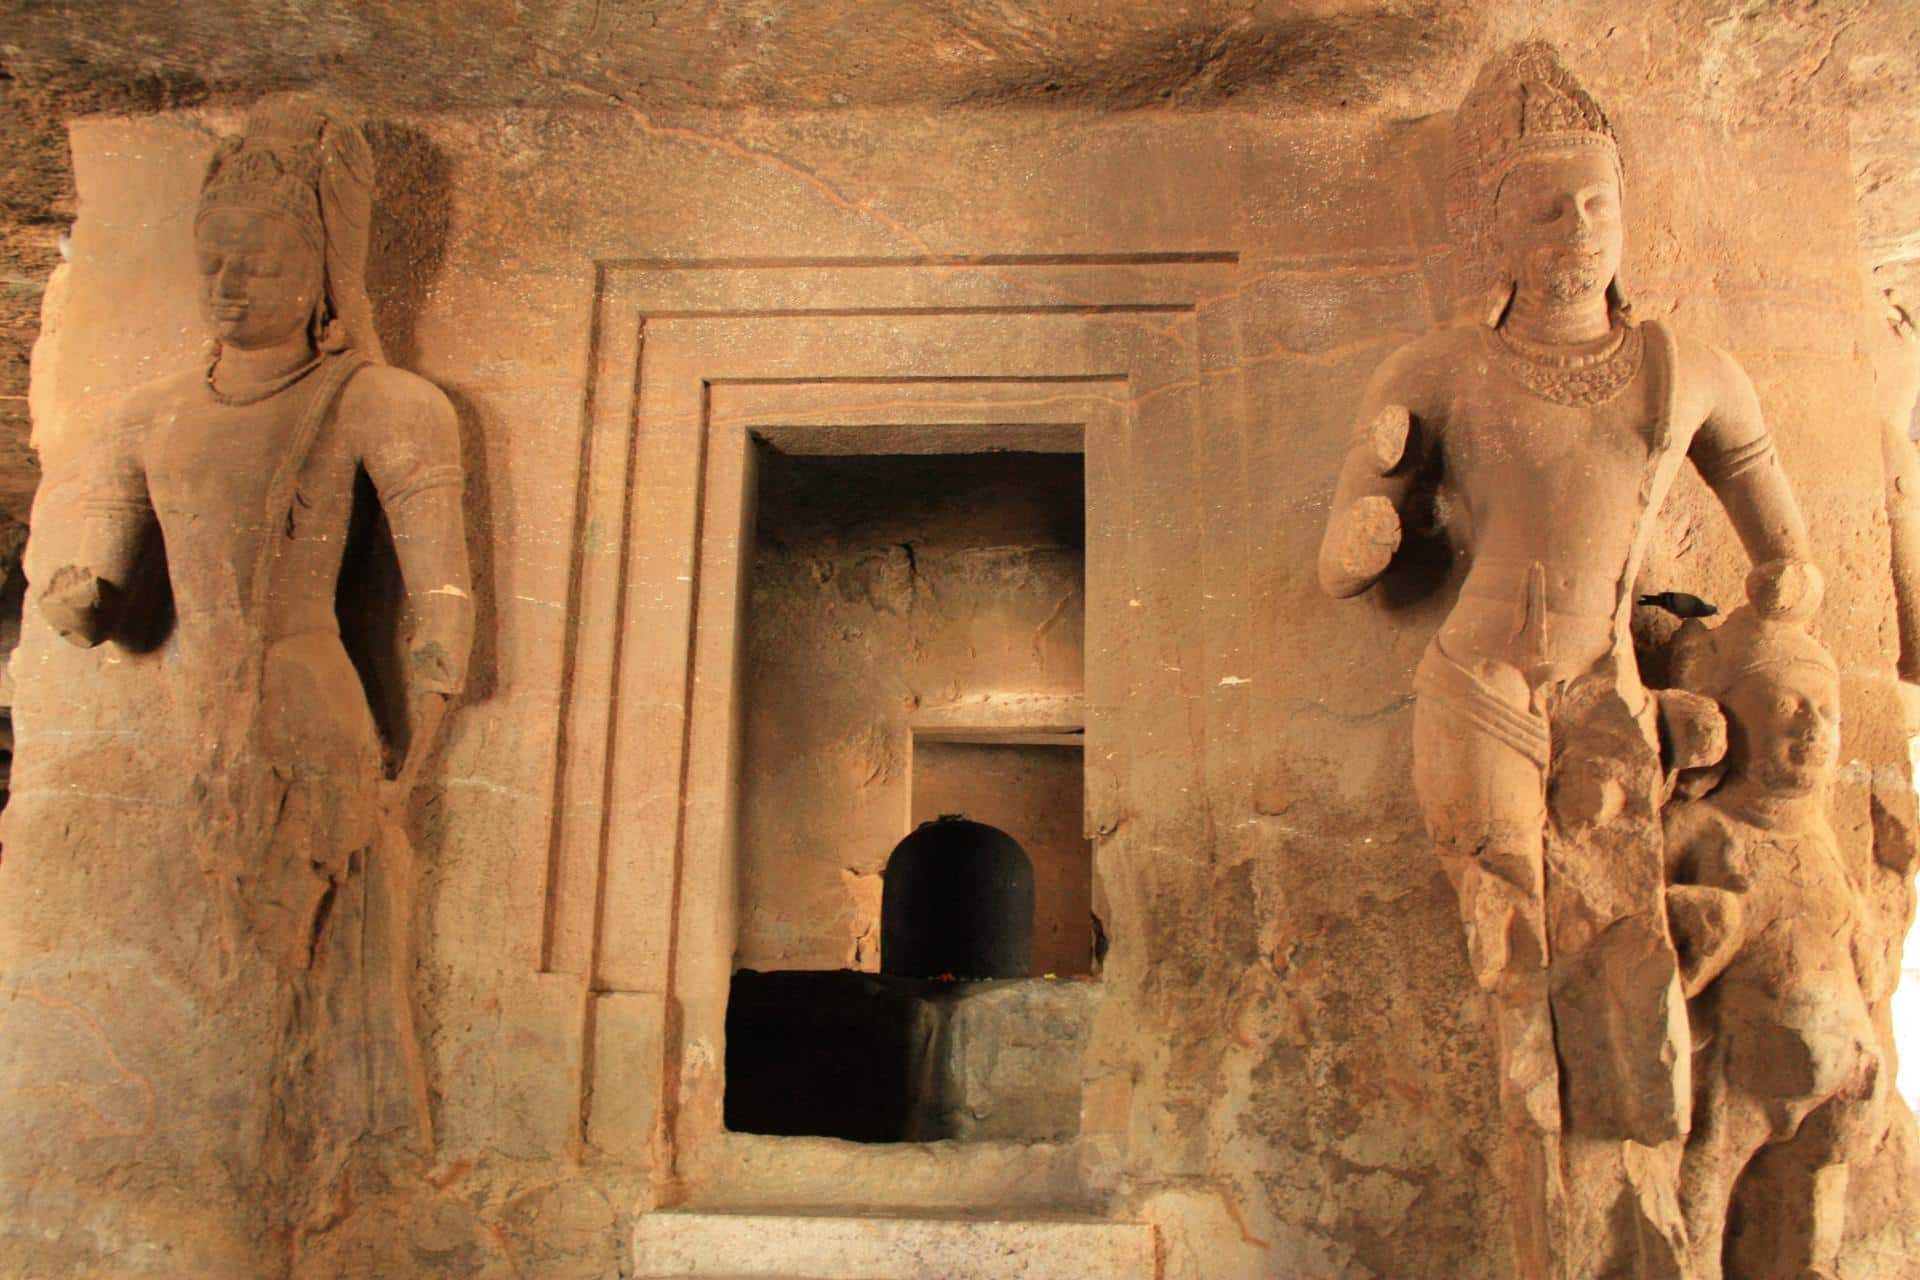 The Temple Caves Of Elephanta